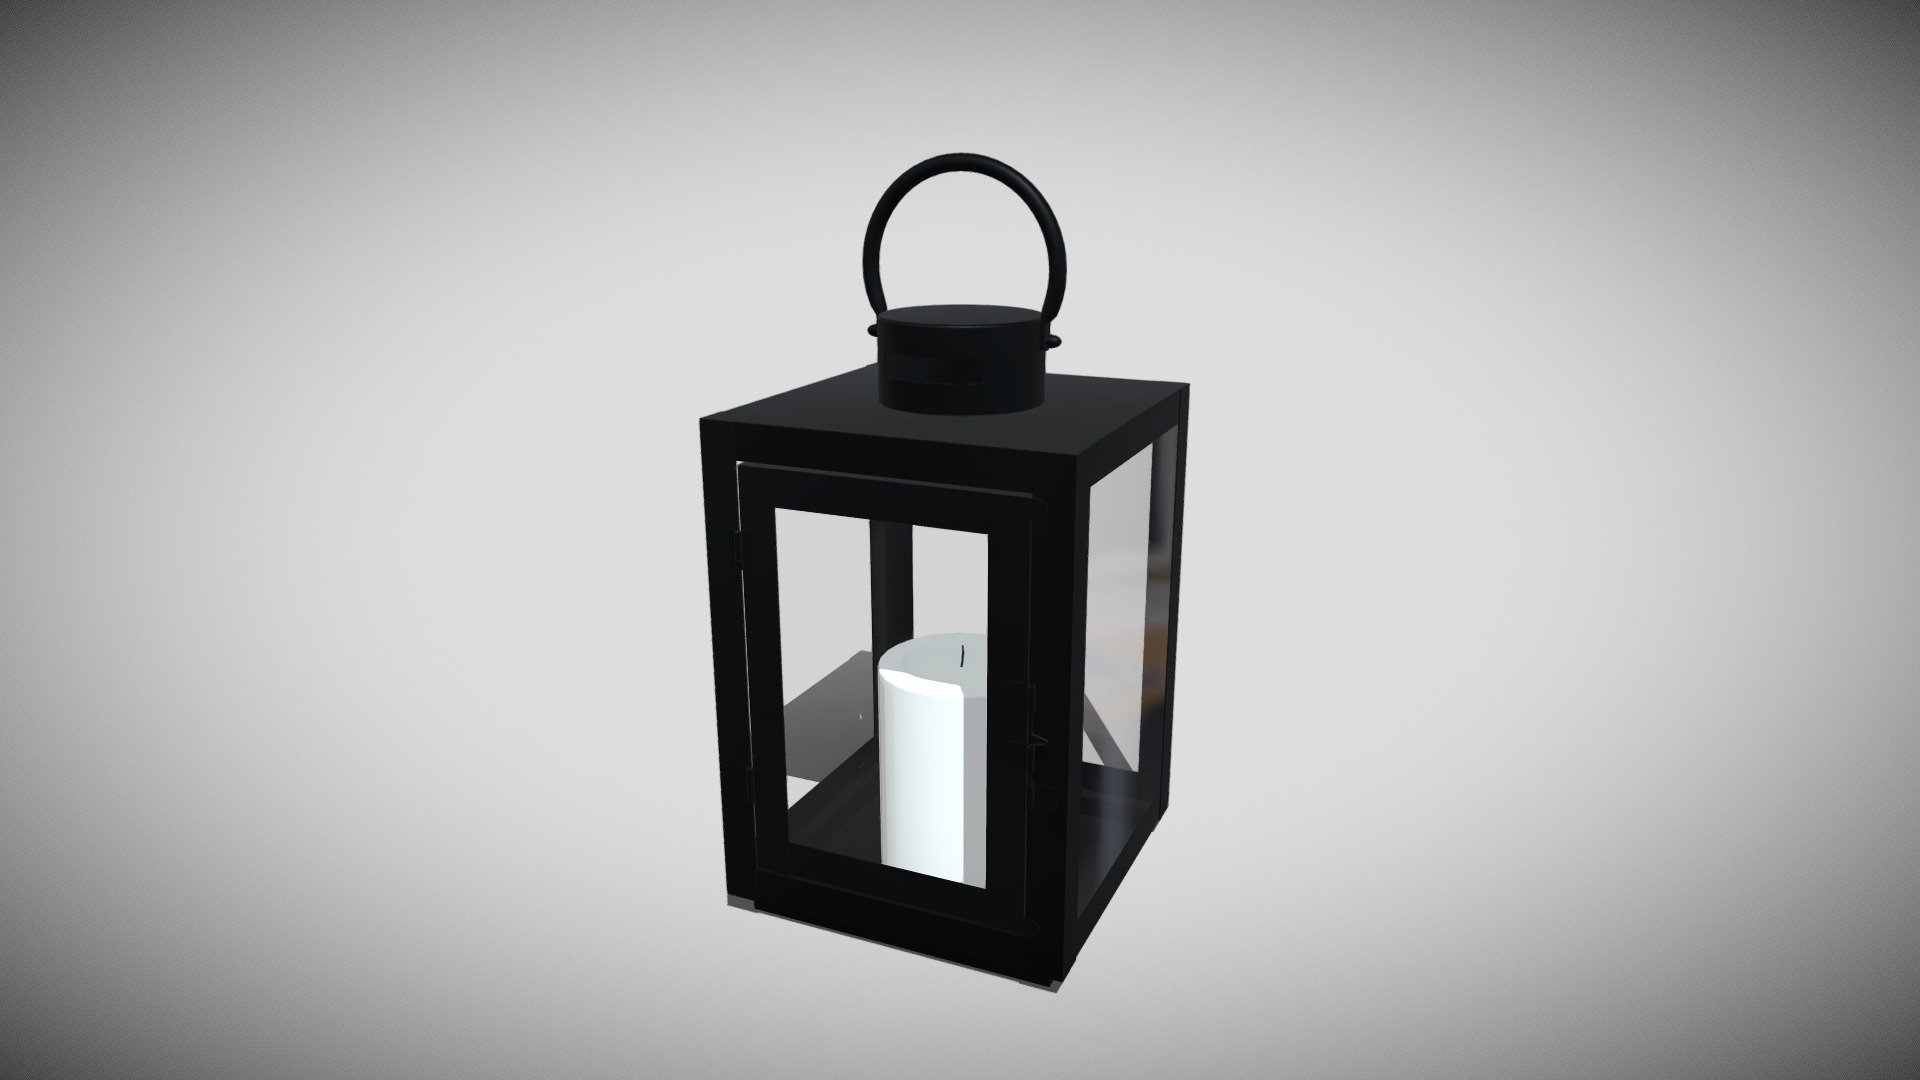 Detailed model of a Metal Lantern, modeled in Cinema 4D.The model was created using approximate real world dimensions.

The model has 7,366  polys and 7,212 vertices.

An additional file has been provided containing the original Cinema 4D project files and other 3d export files such as 3ds, fbx and obj 3d model